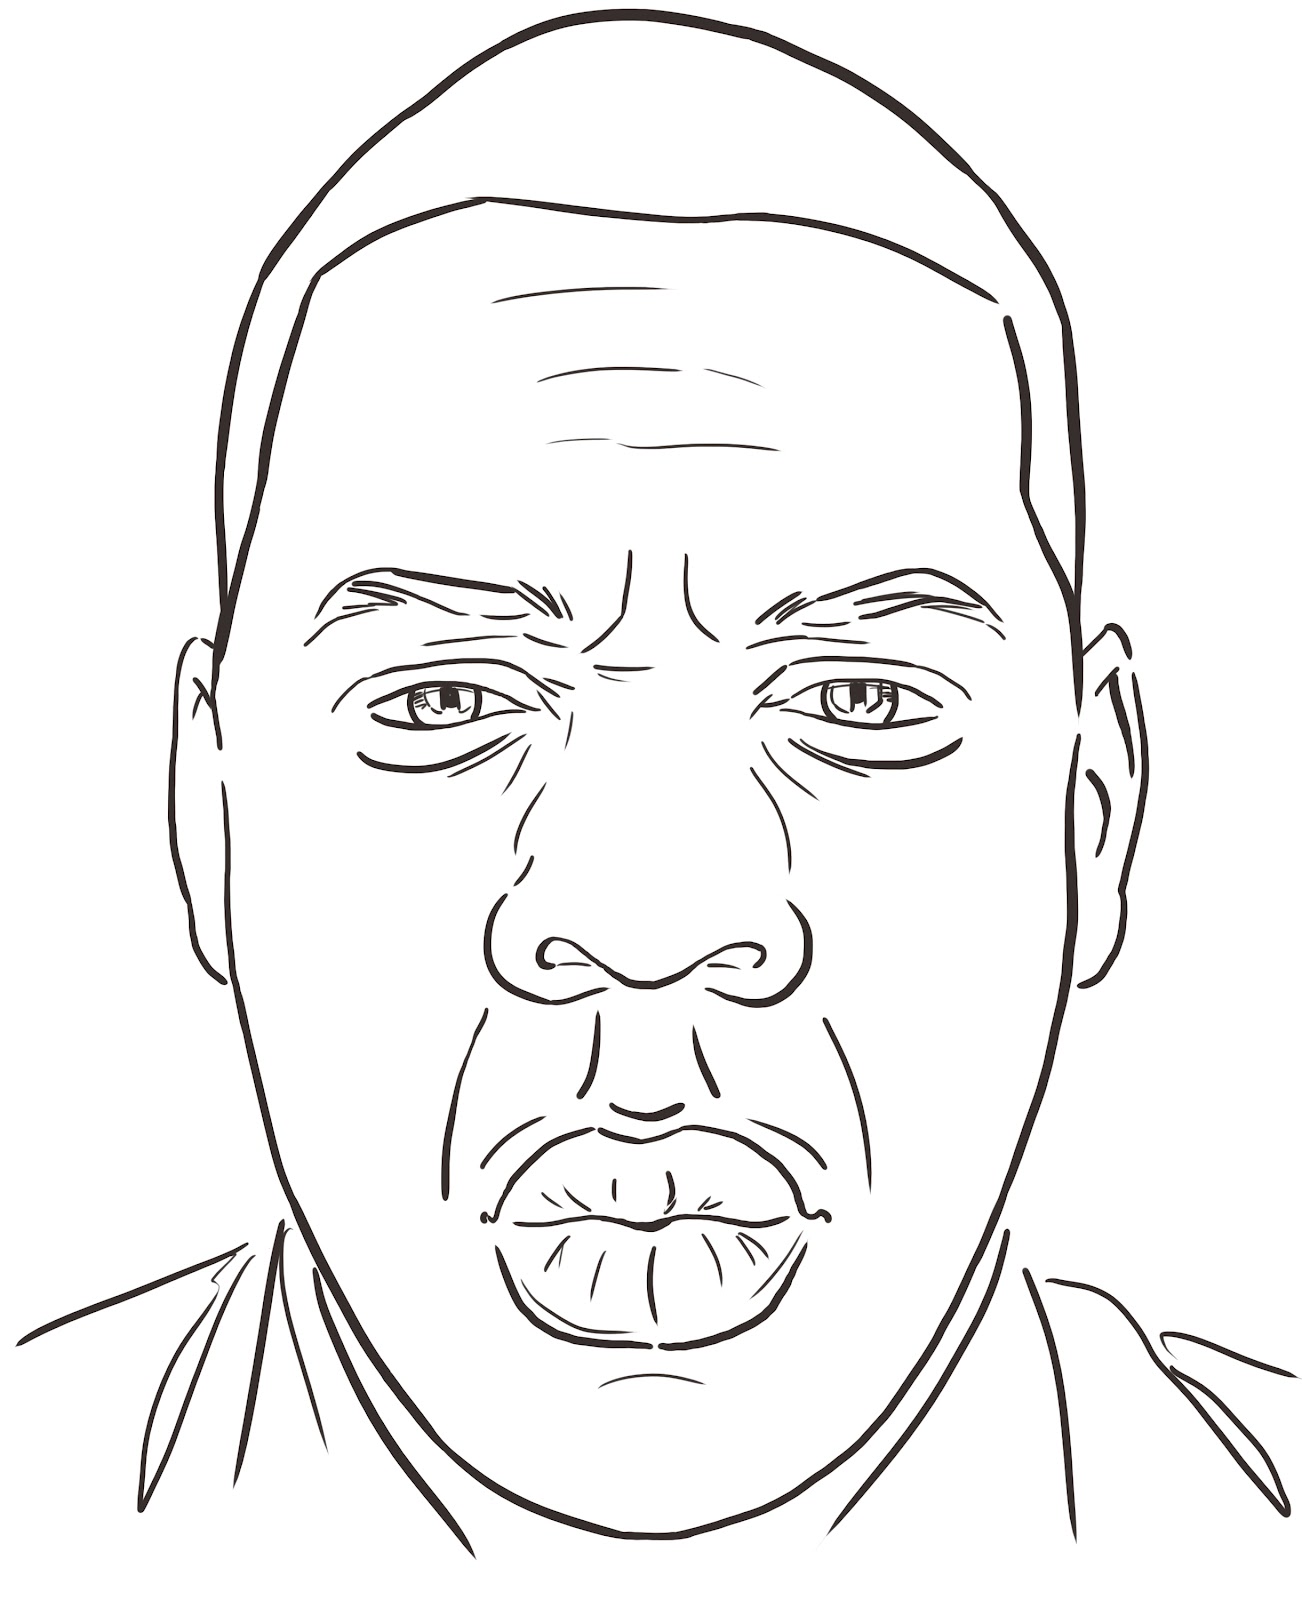  Jay Z Coloring pages for Kids